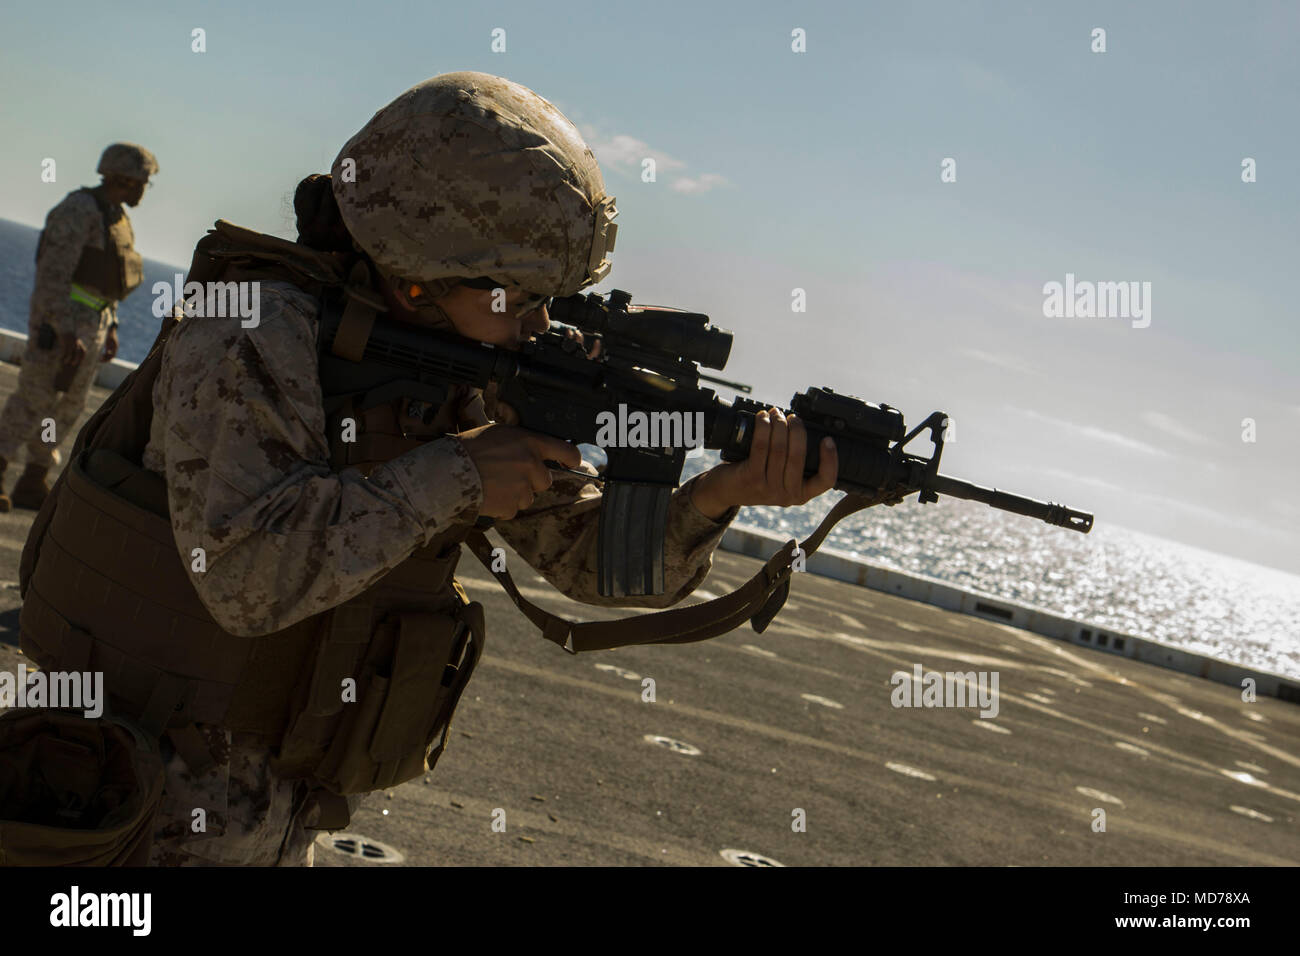 MEDITERRANEAN SEA (March 30, 2018) Marine Corps Sgt. Daneth Cueto , an embark specialist assigned to Combat Logistics Battalion 26, 26th Marine Expeditionary Unit (MEU) fires her M4 carbine rifle during a deck shoot aboard San Antonio-class amphibious transport dock USS New York (LPD 21) March 30, 2018. The MEU maintains a constant state of readiness by doing routine weapons familiarization and deck shoots while deployed to U.S. 6th Fleet area of operations. U.S. 6th Fleet, headquartered in Naples, Italy, conducts the full spectrum of joint and naval operations, often in concert with allied an Stock Photo